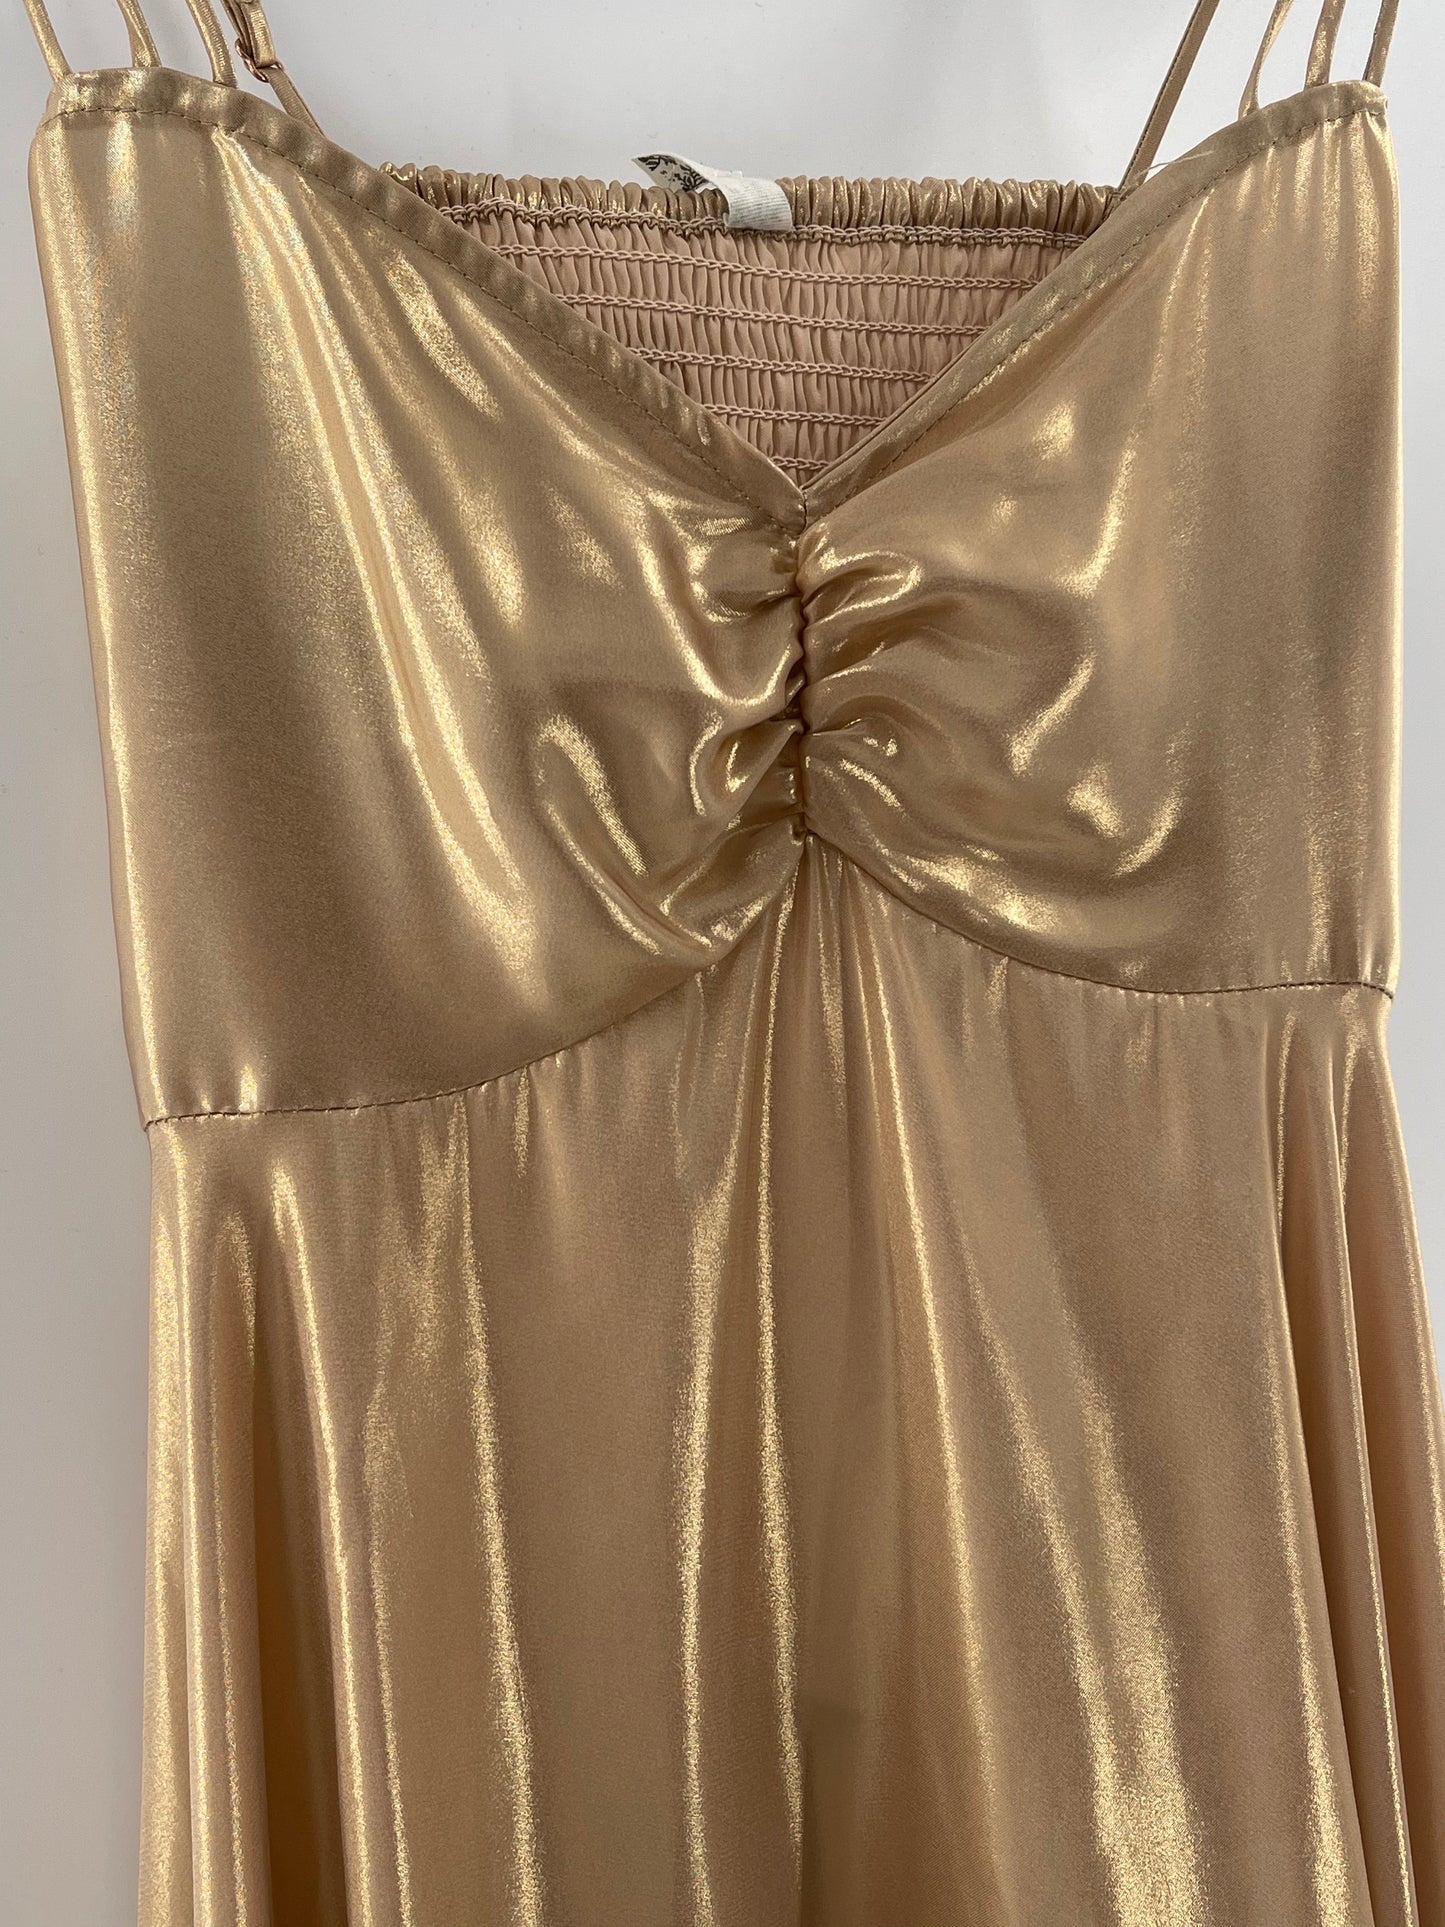 Free People Gold Molten Metal Dress (Small)